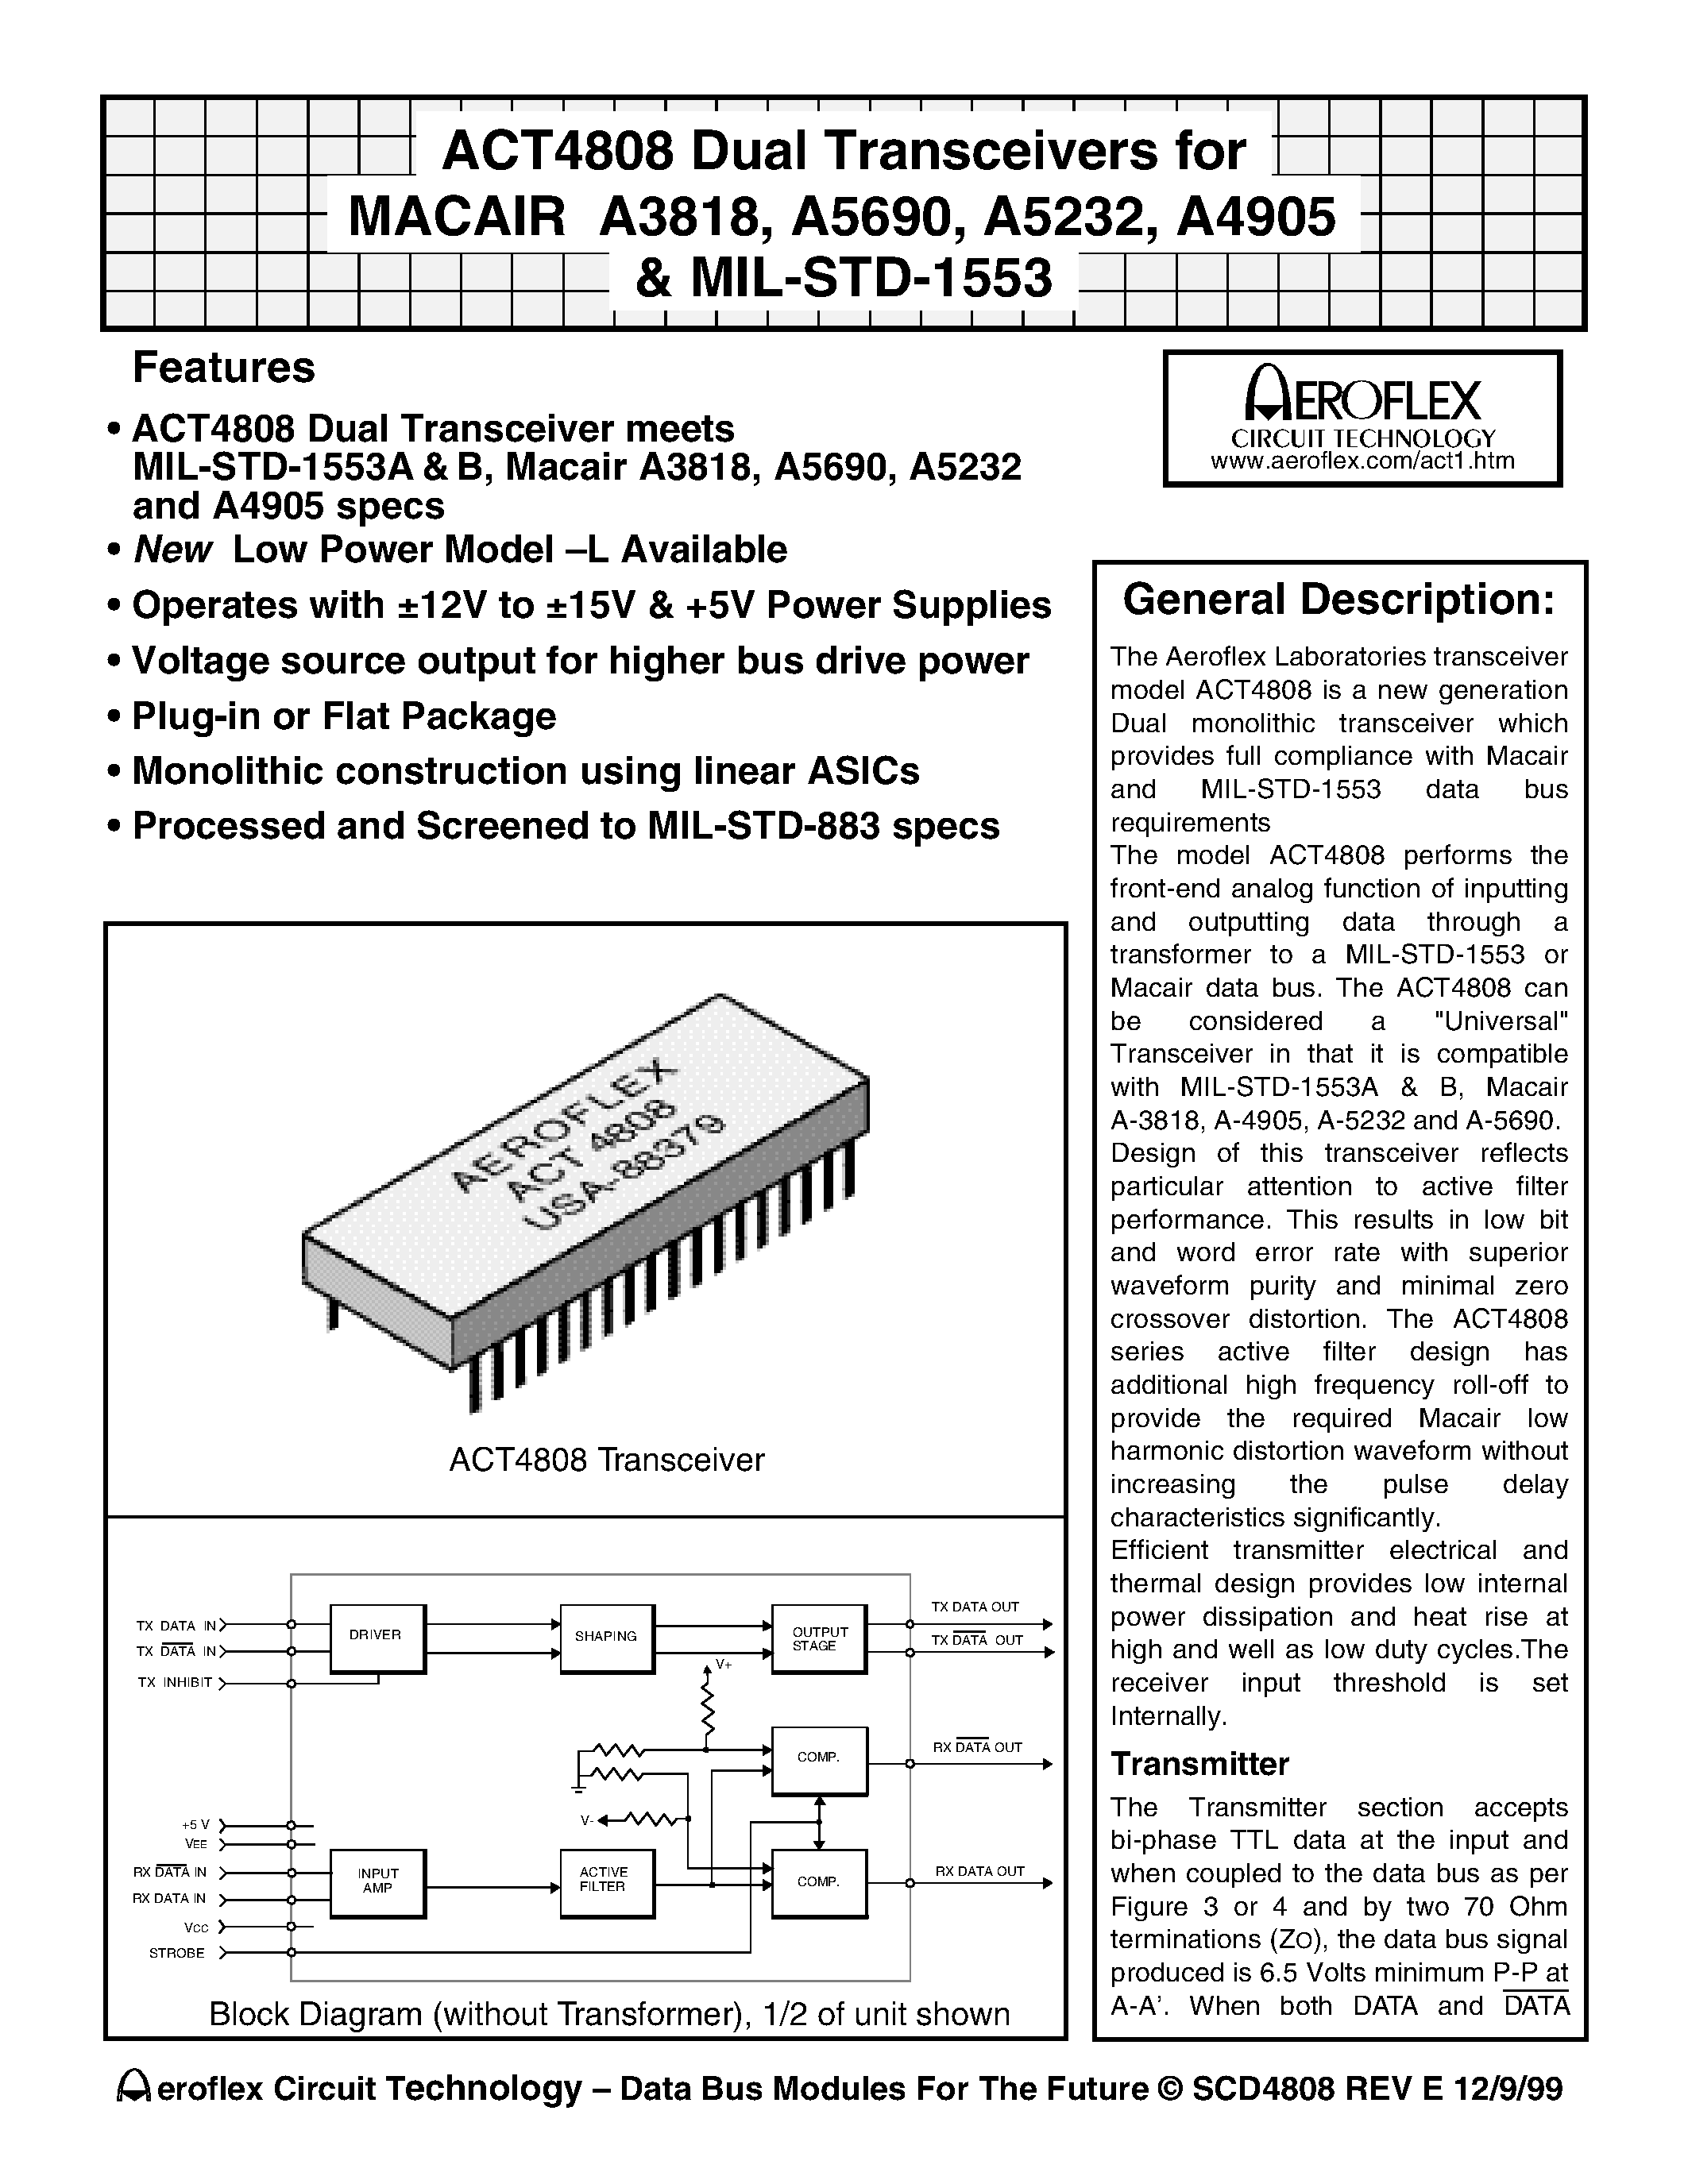 Datasheet ACT4808LDFI - ACT4808 DUAL TRANSCEIVERS FOR MACAIR A3818/ A5690/ A5232/ A4905 & MIL-STD-1553 page 1